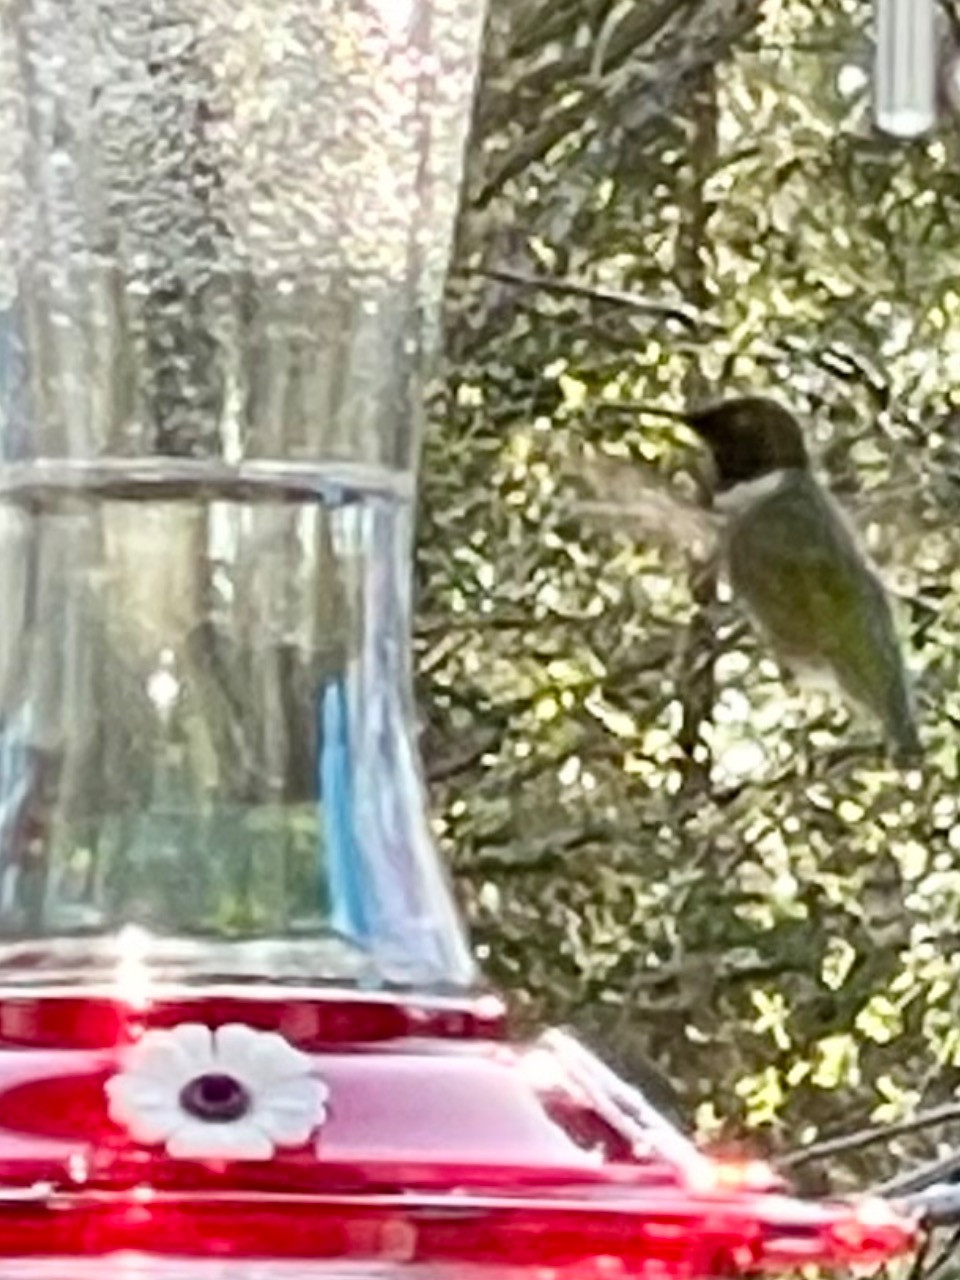 A hummingbird hovers near a hummingbird feeder with clear nectar and a red base